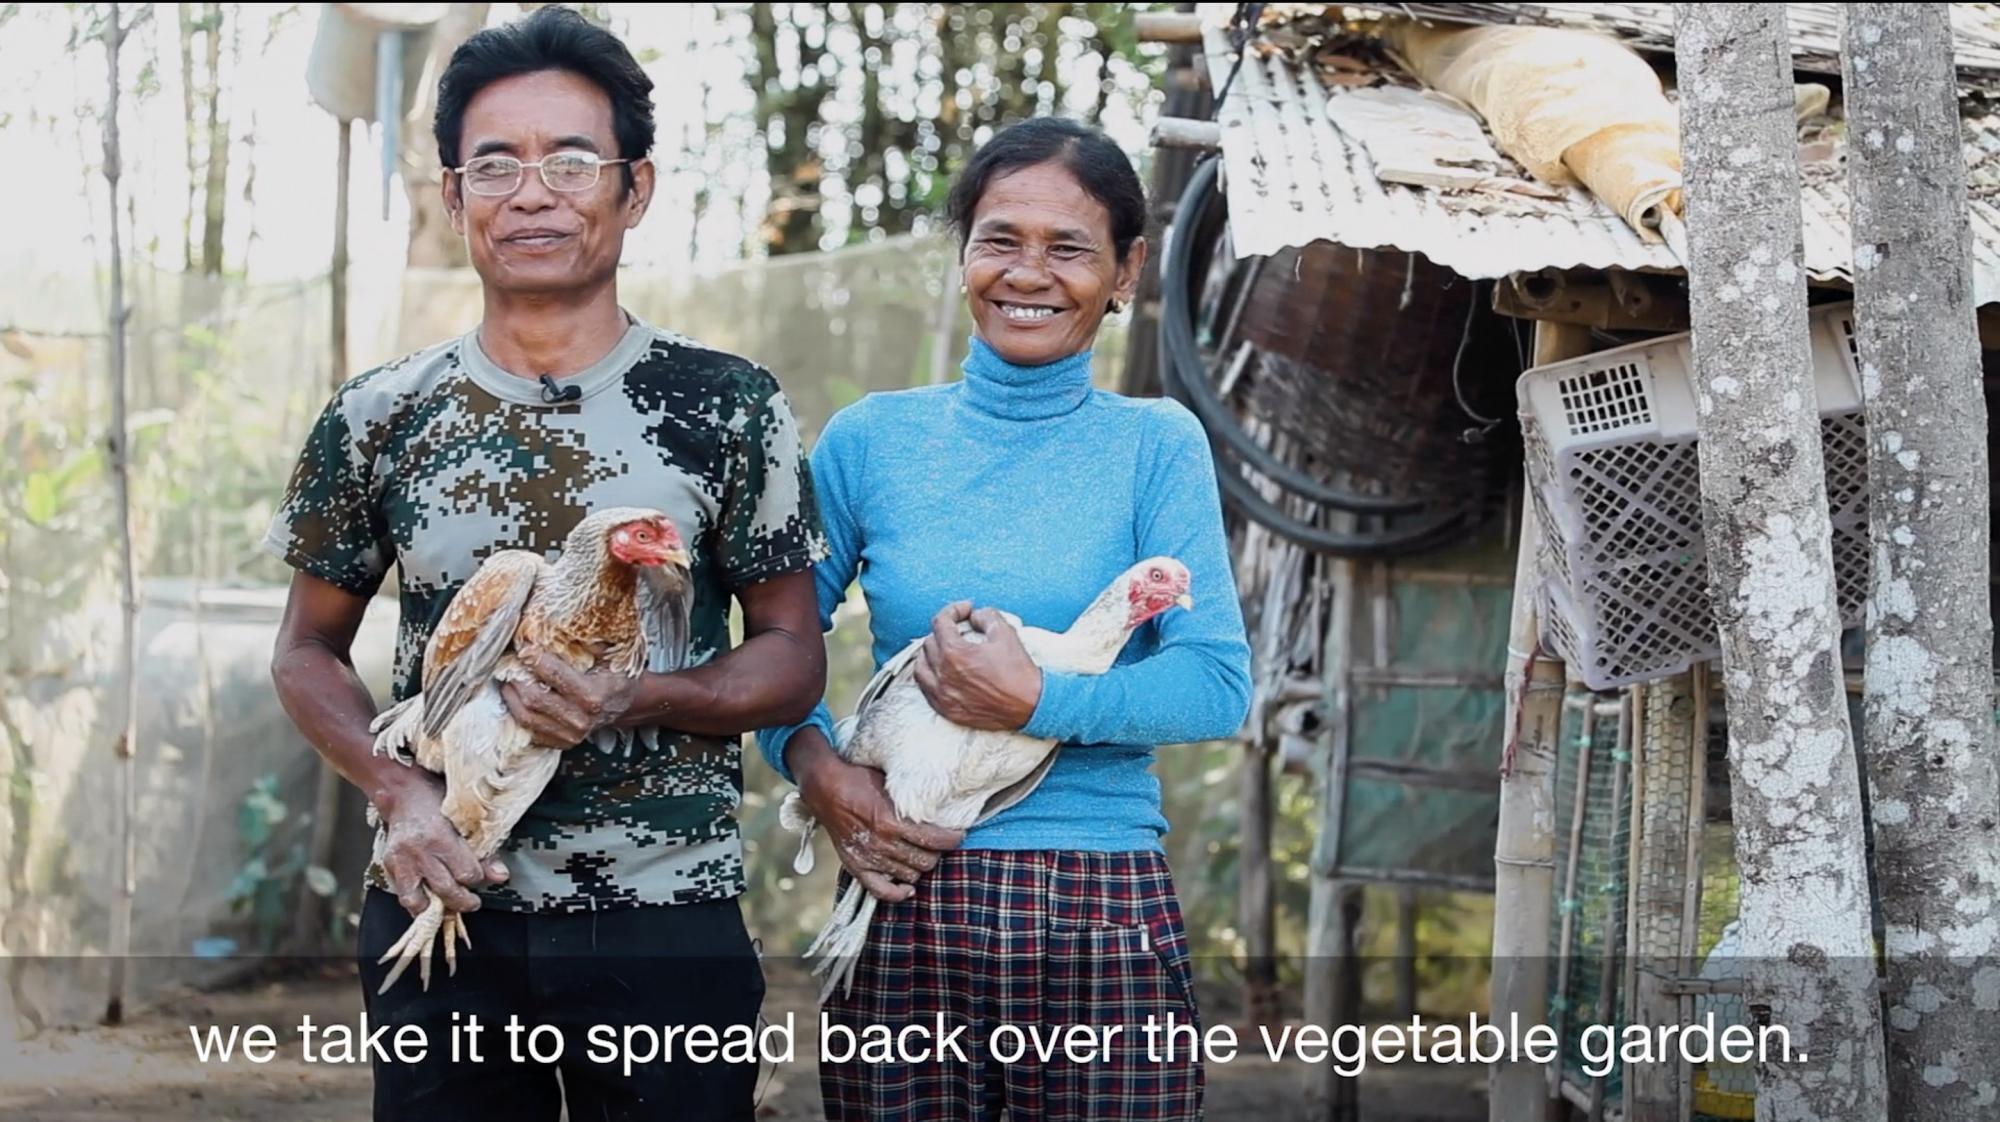 A screenshot from a video of a Cambodian man and woman holding chickens